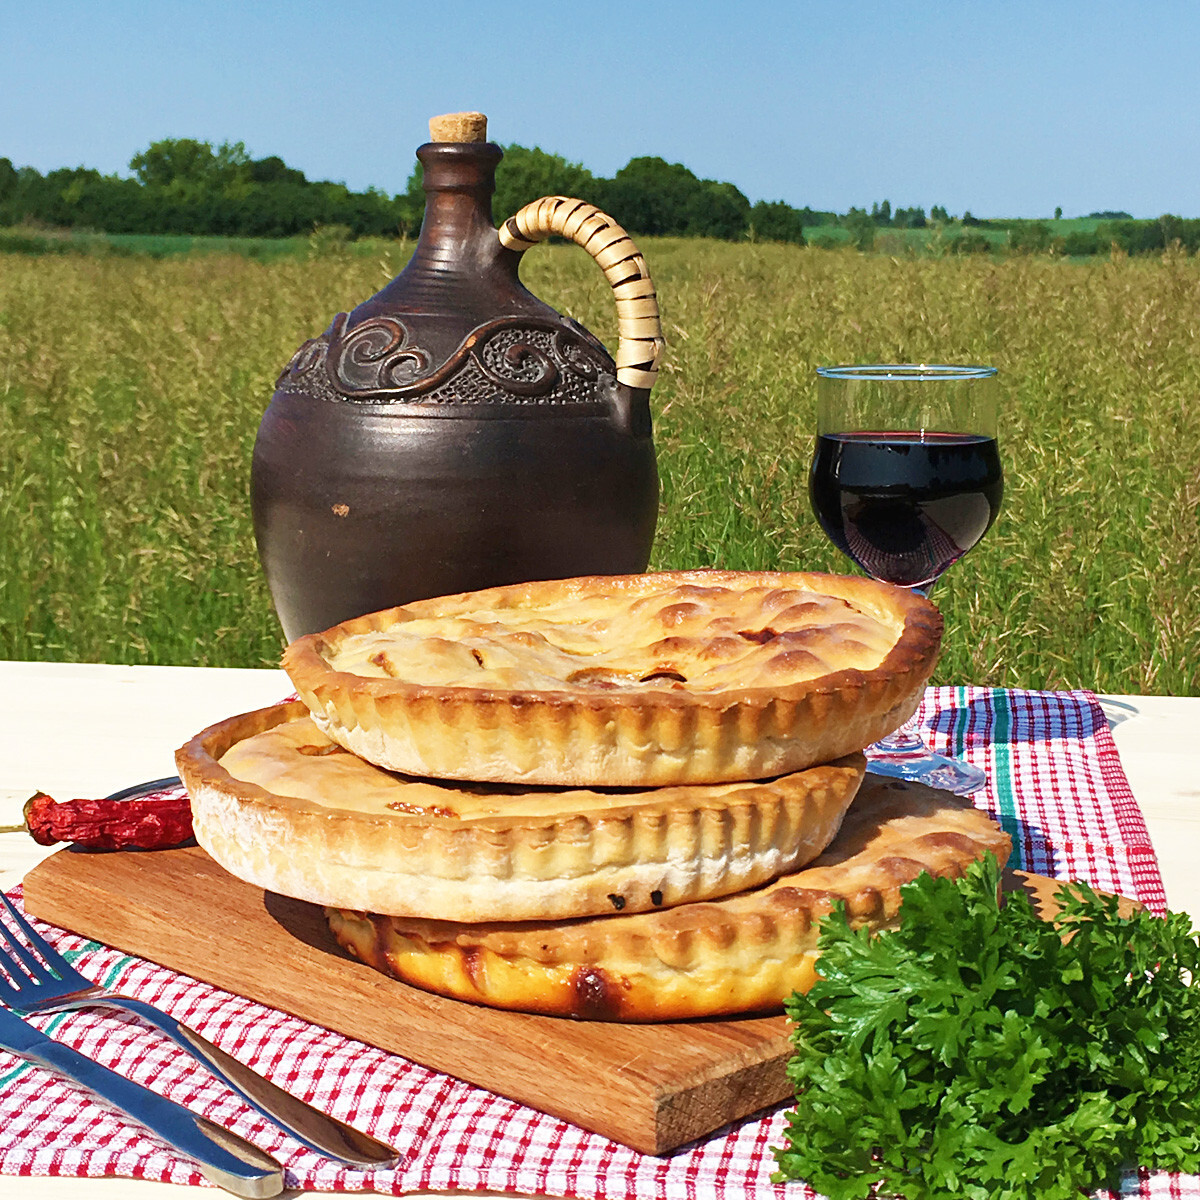 Ossetian pie has become so popular with Russians that you can find them in every city, as hundreds and even thousands of shops make this popular Caucasian dish.